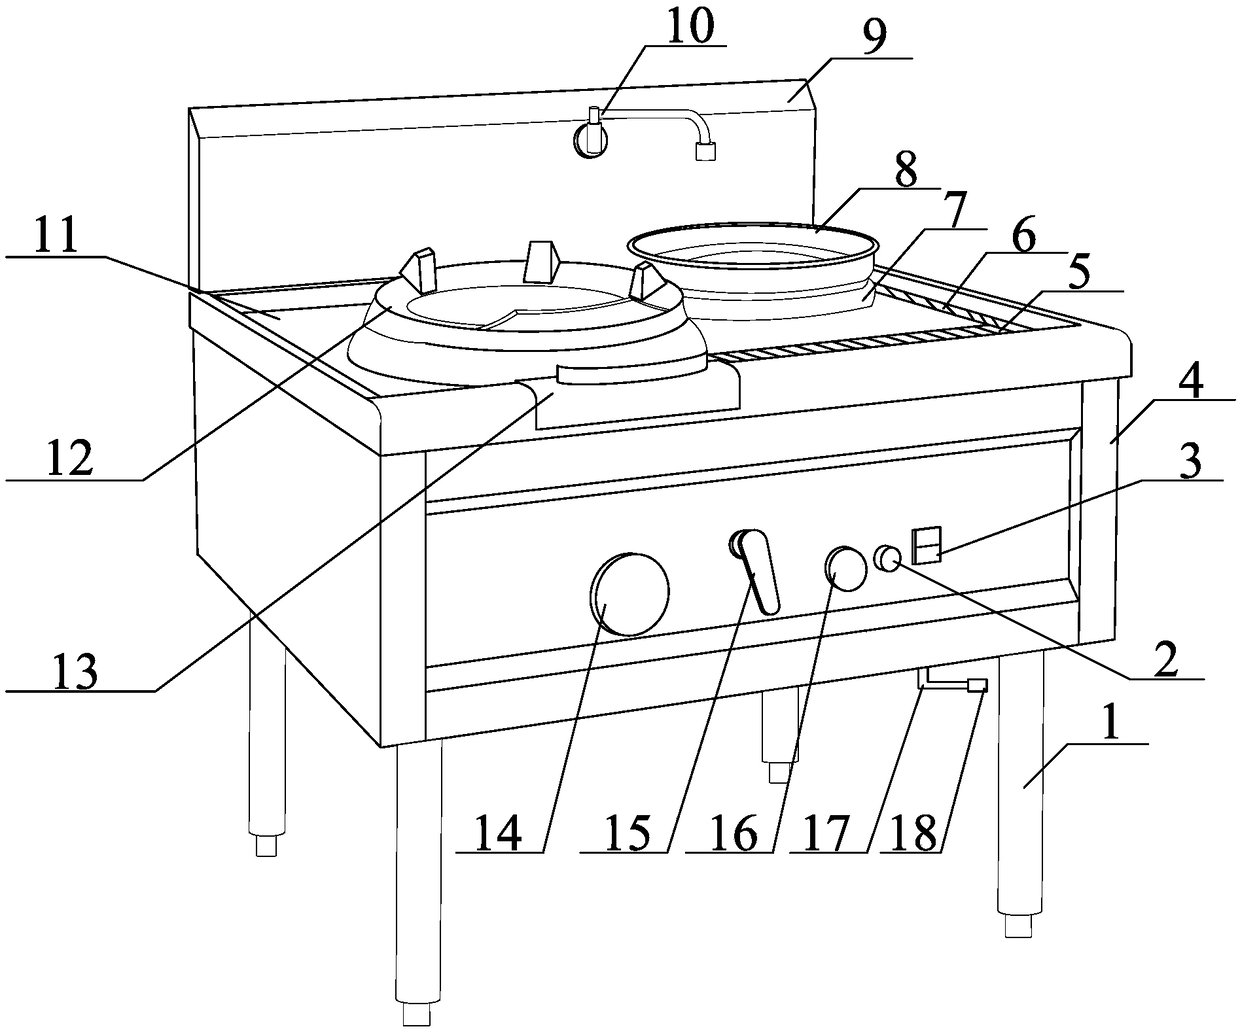 Infrared energy-saving gas stove for Chinese cuisines